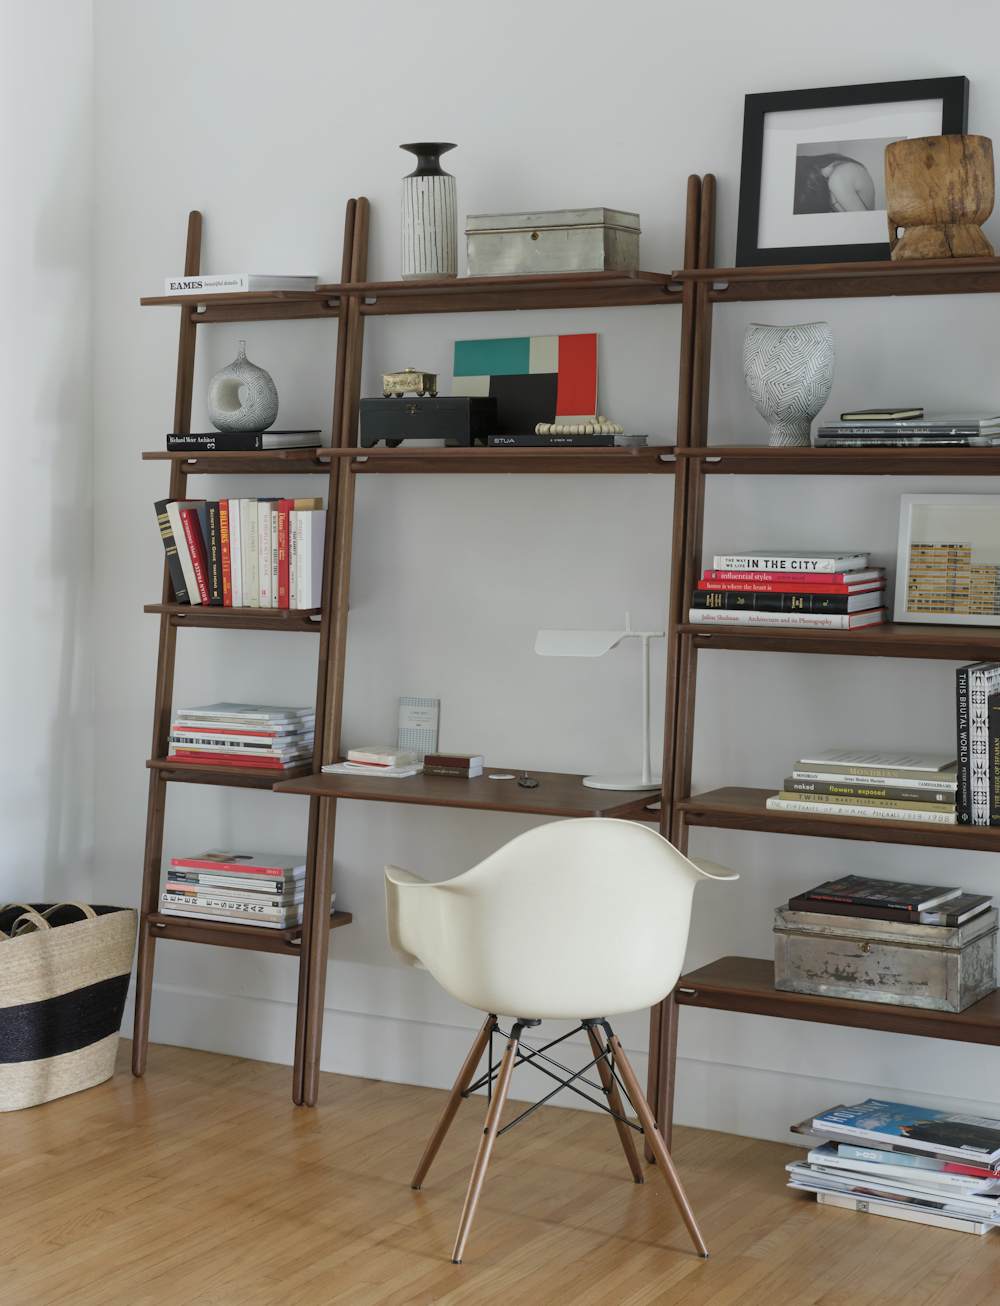 Fold Ladder Shelving and Eames Molded Plastic Armchair in a home office setting